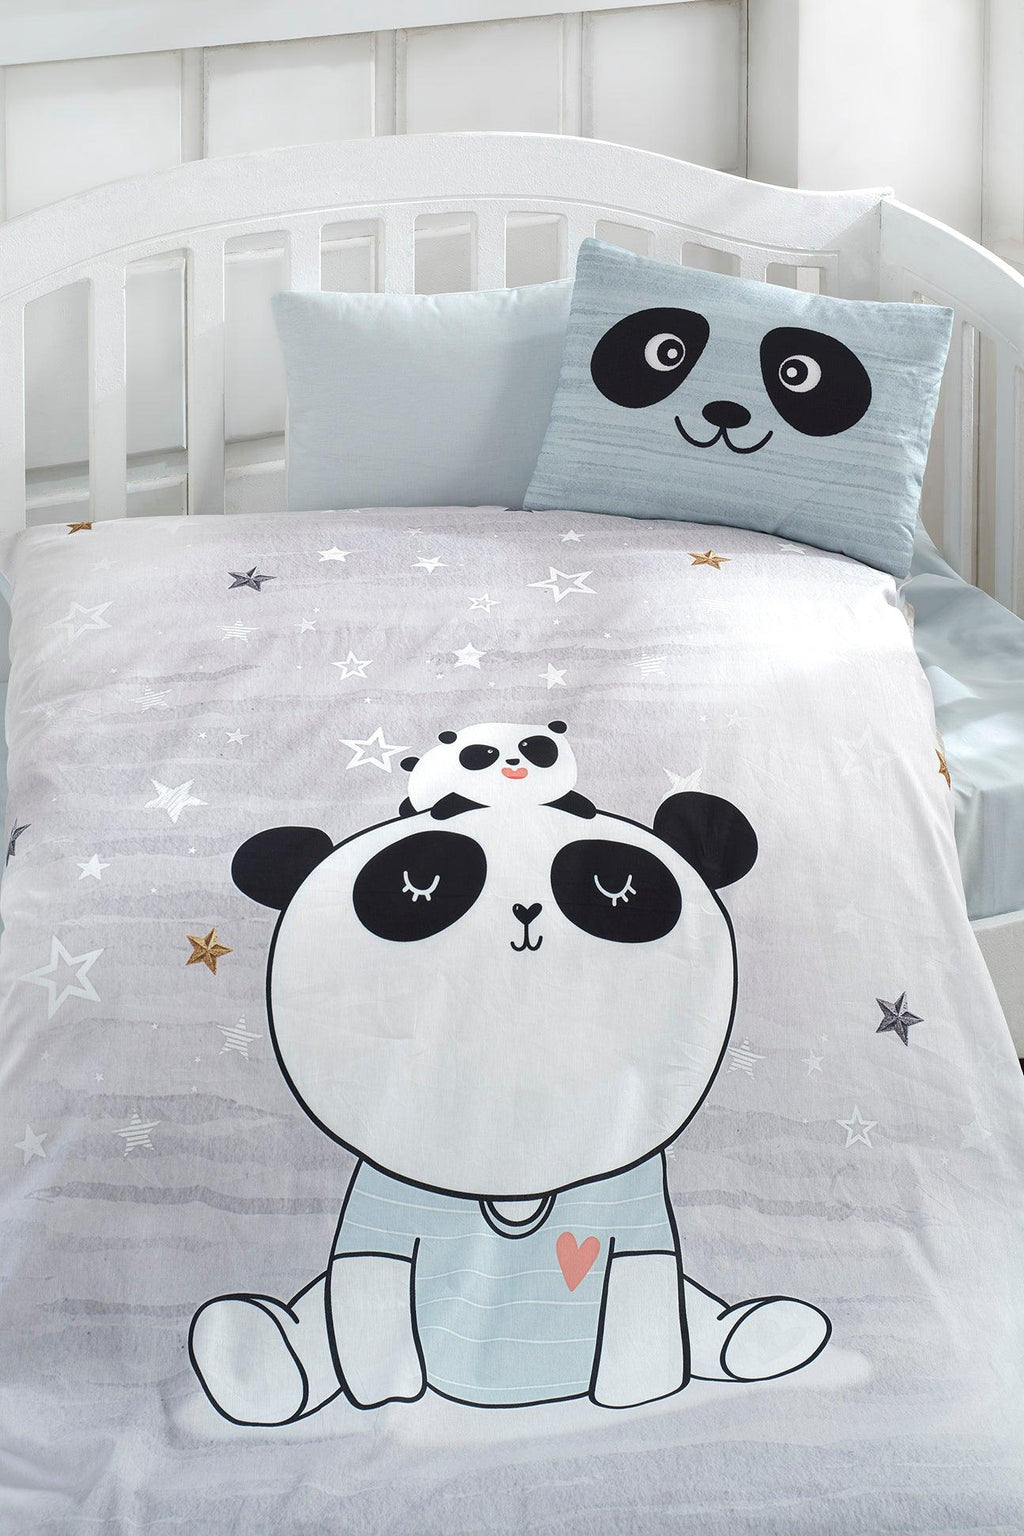 100% Turkish Cotton Baby Duvet Cover Set of 4  Size  Duvet cover: 100 cm x 150 cm  Flatsheet:120 cm x 160 cm  Pillows: 35cm x 45 cm each  Please note that the duvet is not included.   Product Details  Complete your little one's bedding with the cute panda design on the duvet set. Made from 100 % Turkish Cotton, our machine washable sets consist of a duvet cover, a flat sheet and two matching pillow cases. Little ones will absolutely enjoy snuggling into soft cotton fabric. Sweet dreams :)